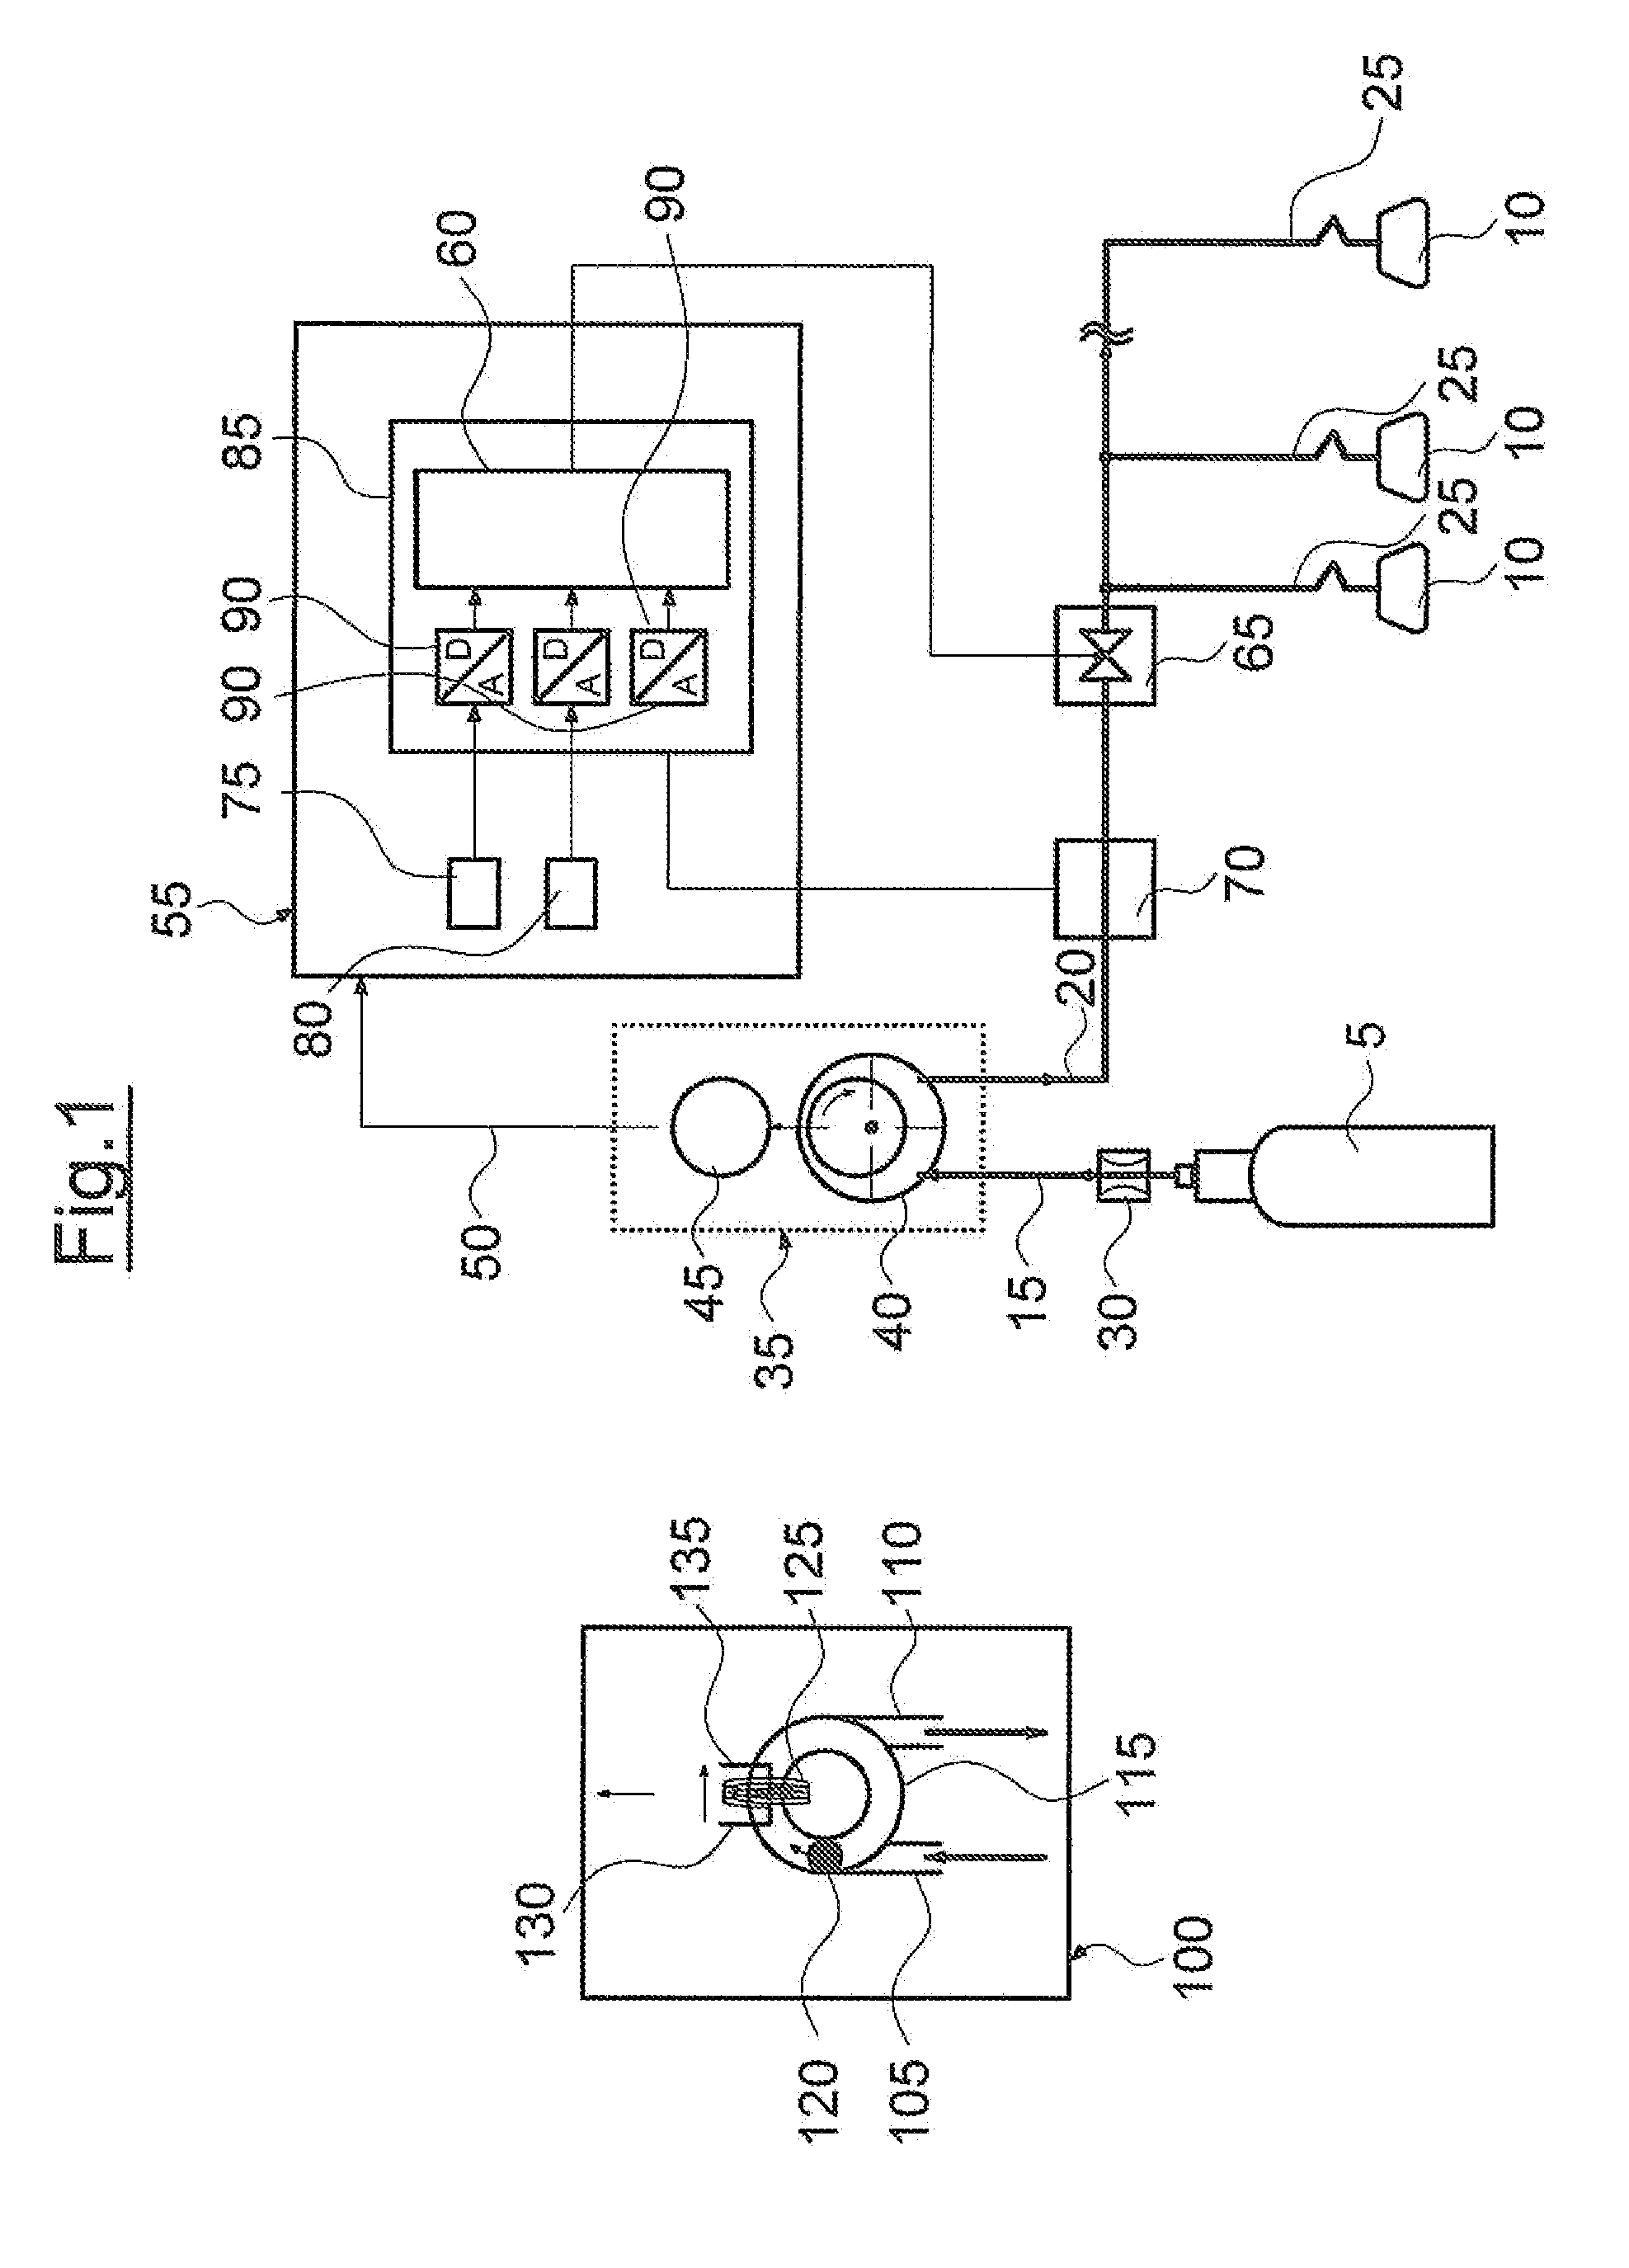 Method and device for controlling the pressure and/or flow rate of fluid